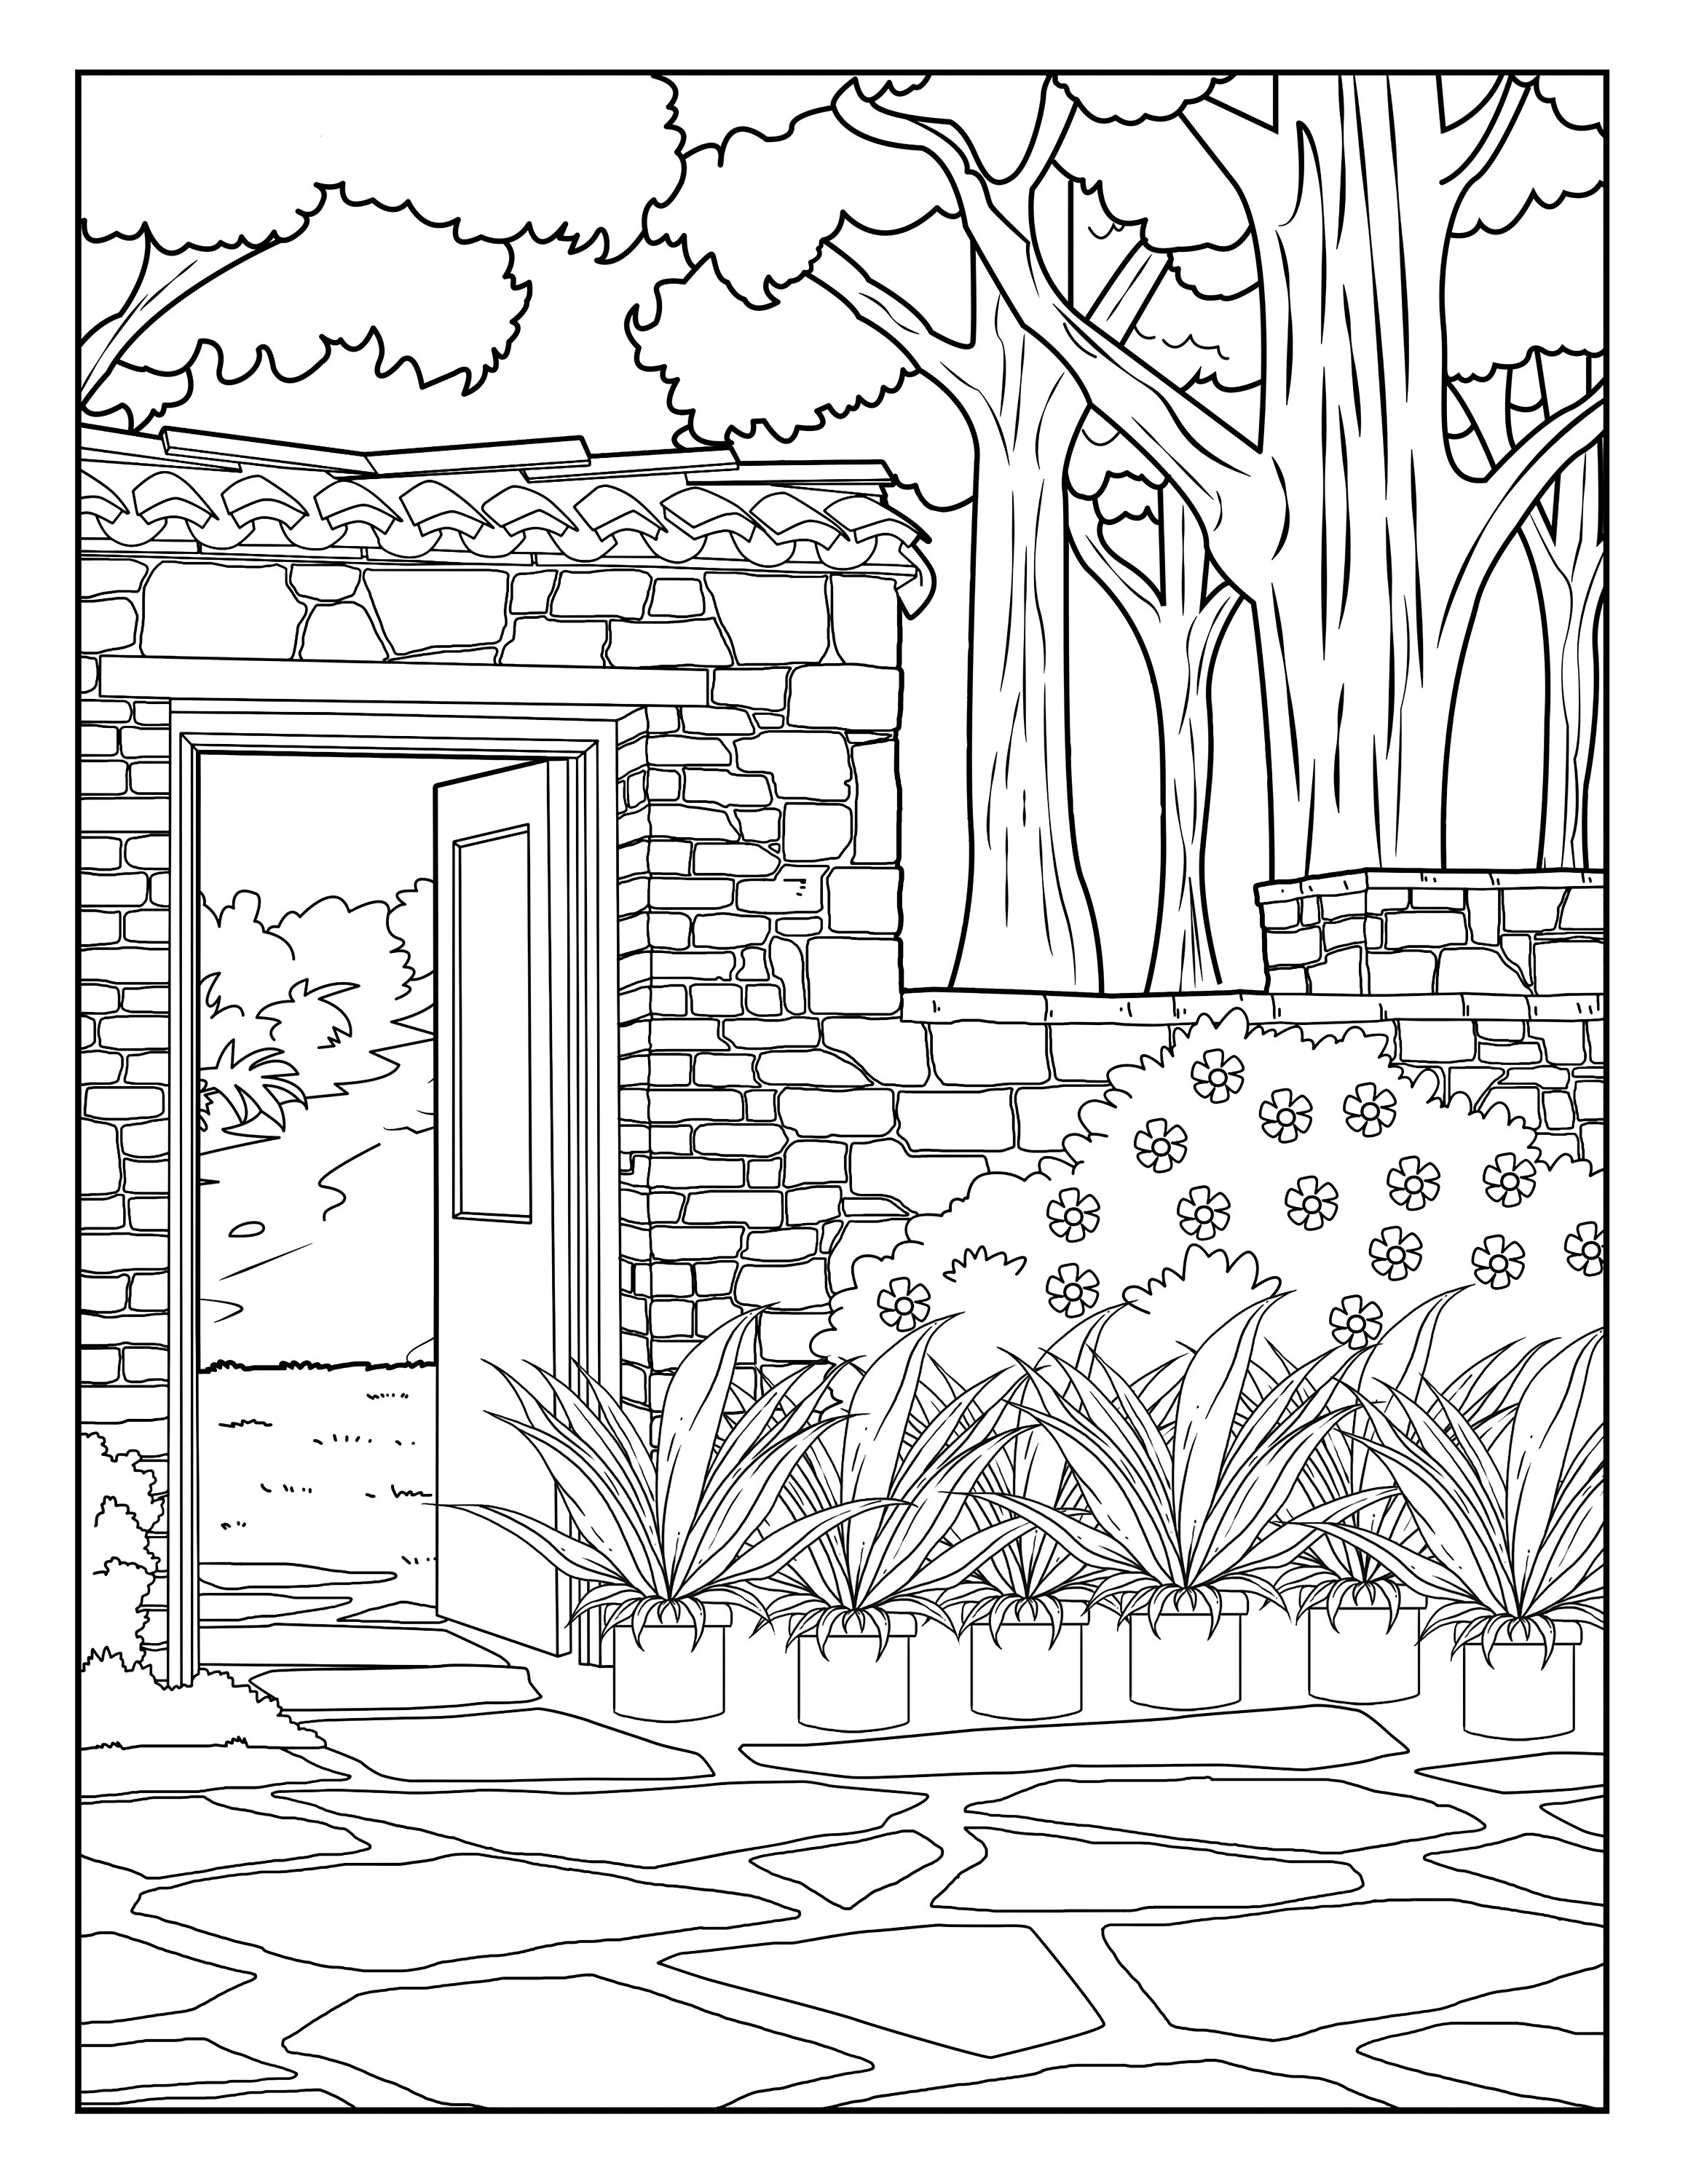 Stone wall garden gallery coloring pages for adults printable coloring page instant download pdf